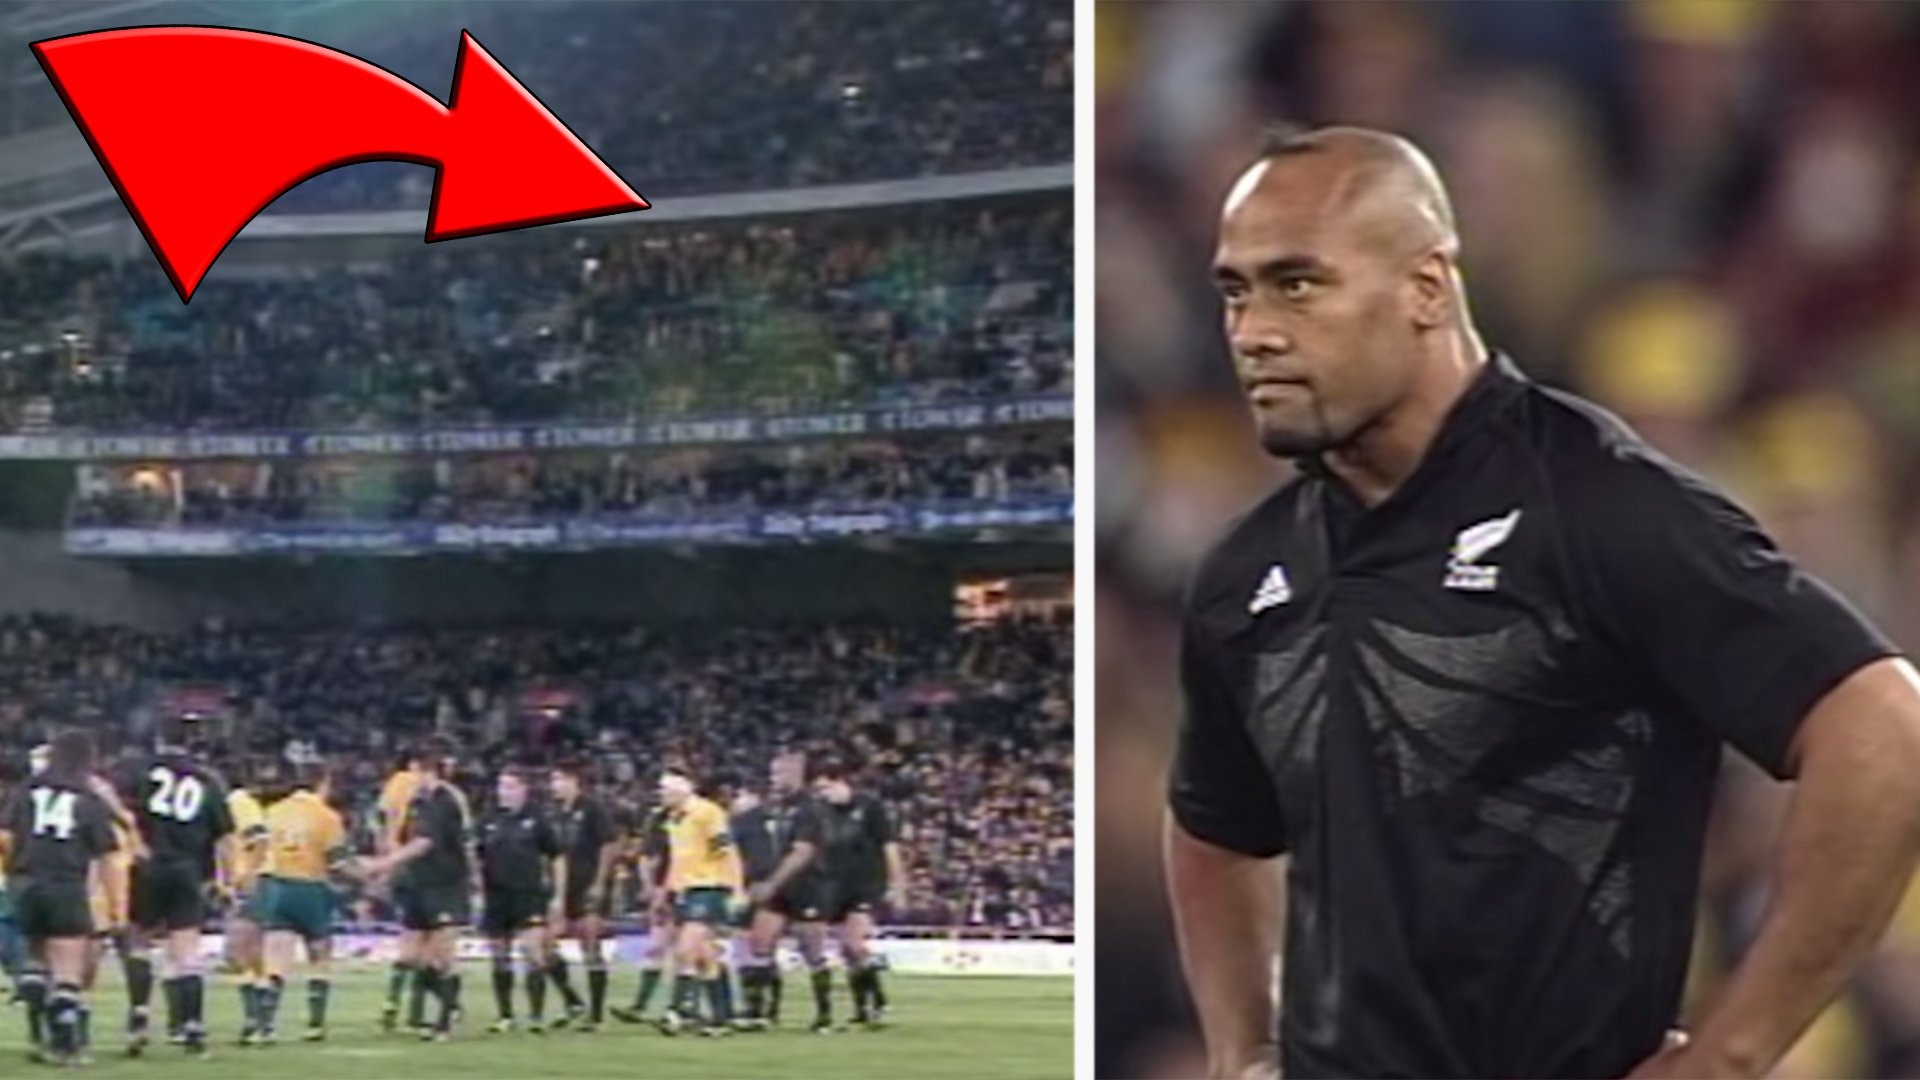 A full video has been released on "The Greatest Rugby Match of All Time" and it's insane